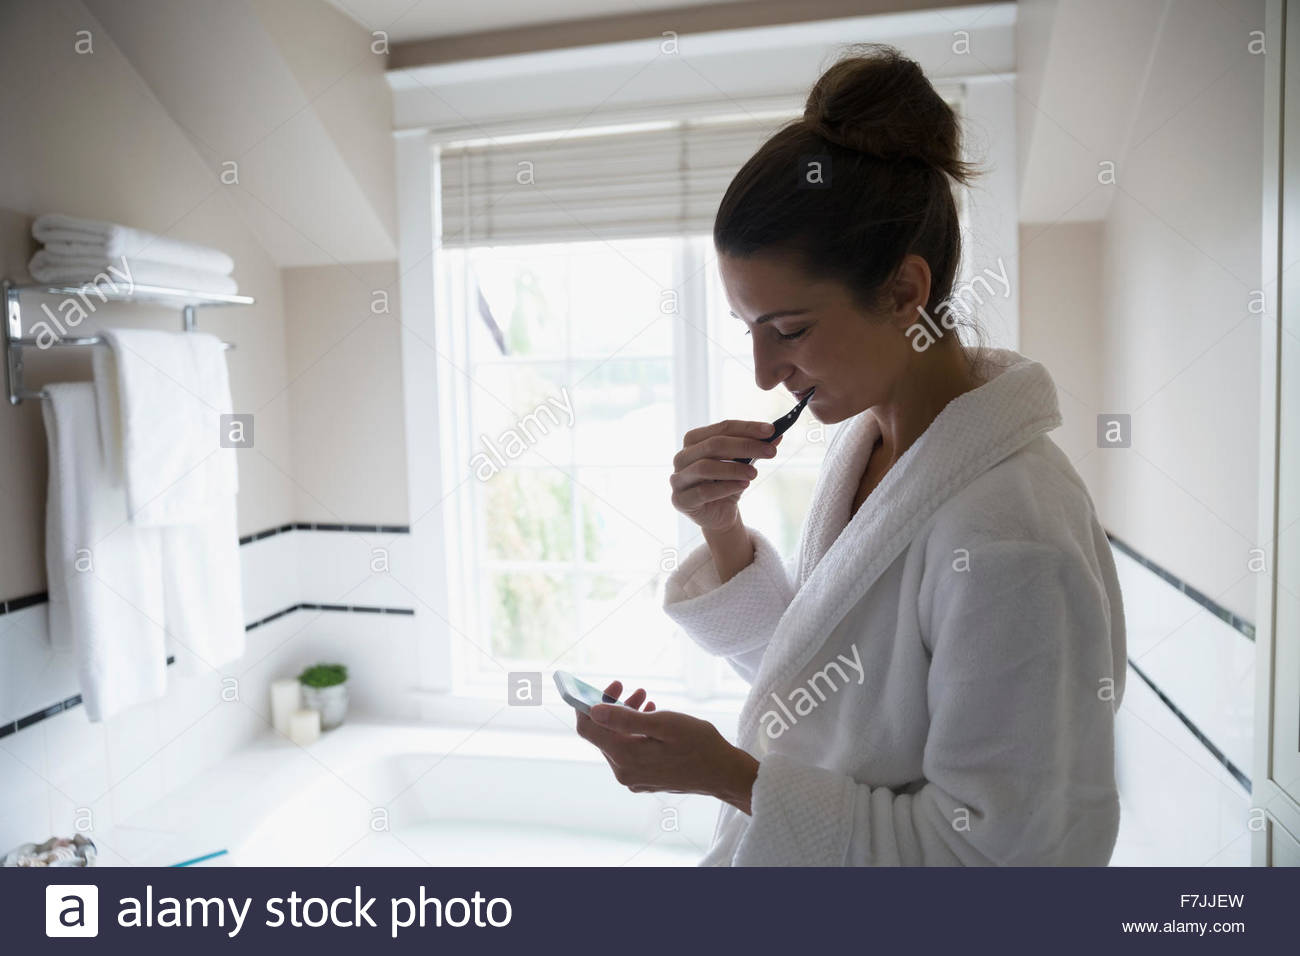 Woman texting and brushing teeth in bathroom Stock Photo